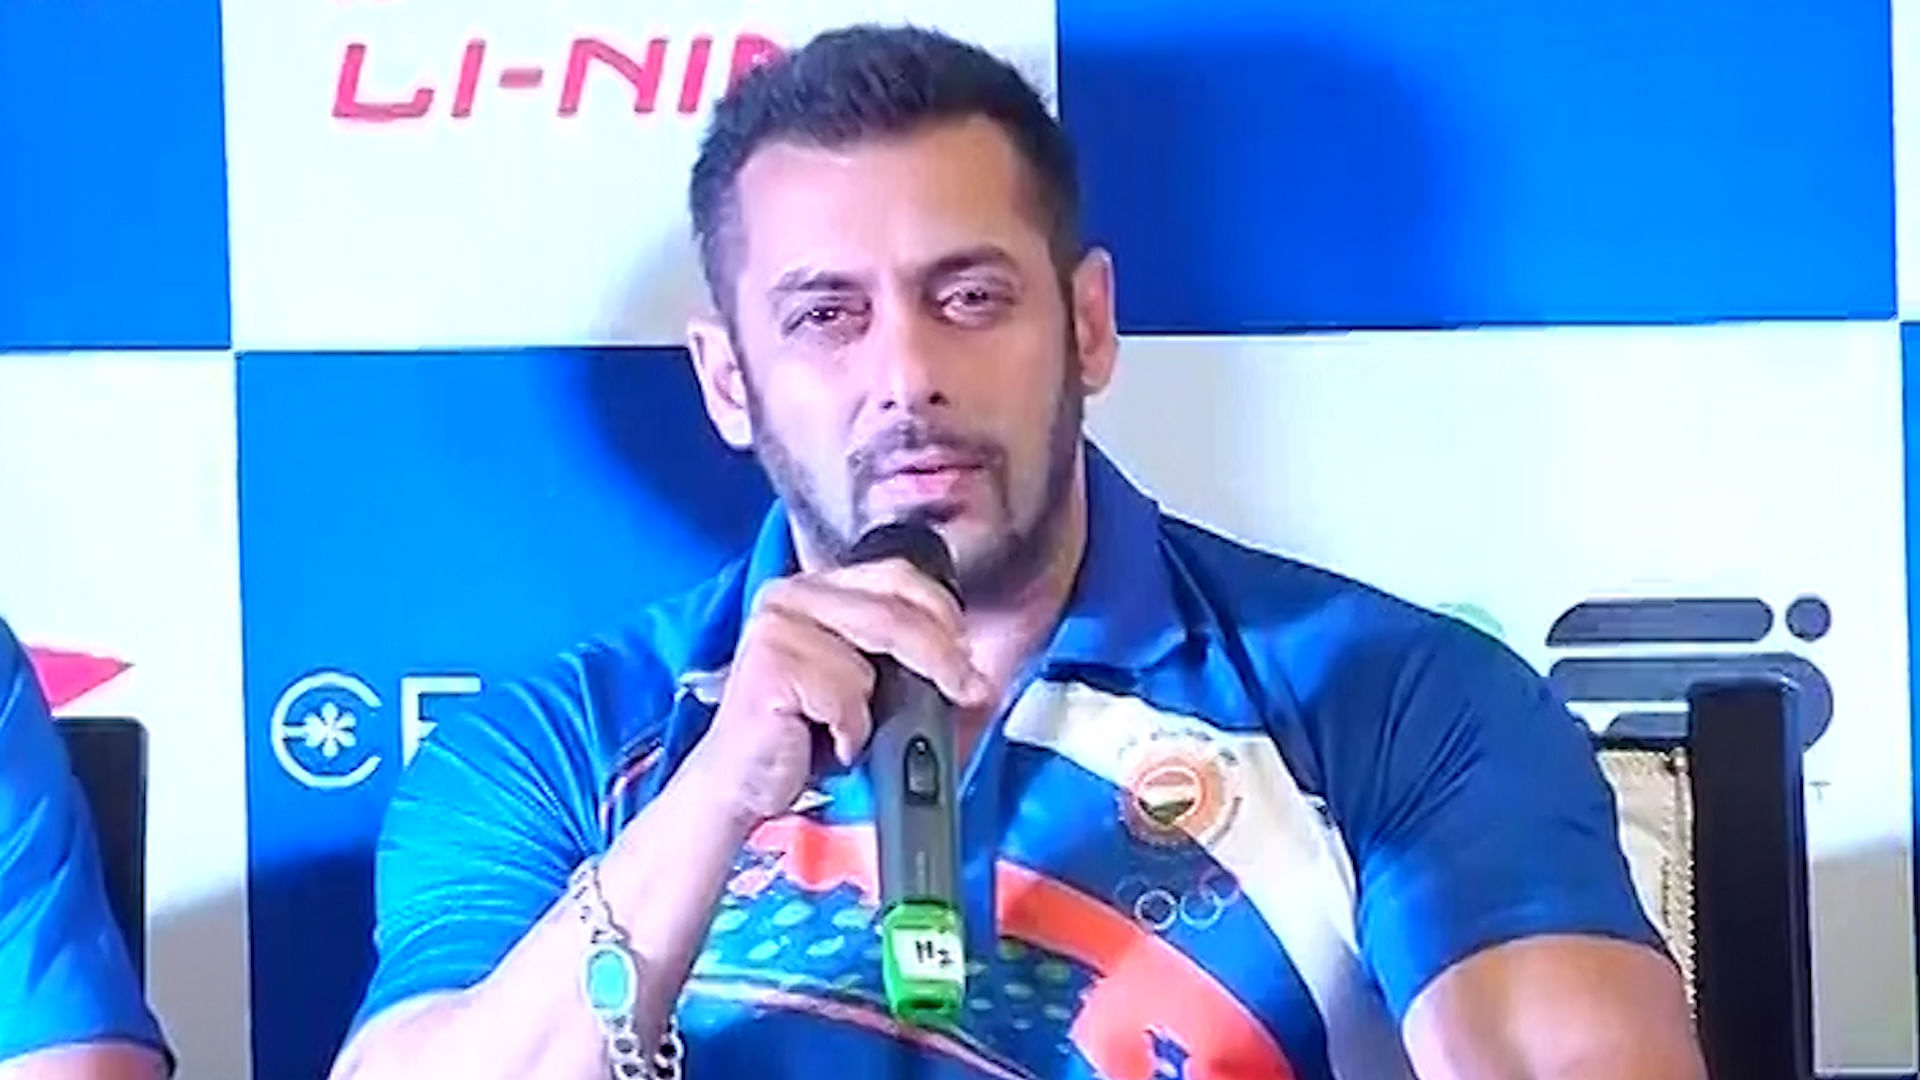 

Bollywood actor Salman Khan has been appointed as the goodwill ambassador for the Indian contingent at the Rio Olympics in 2016, on Saturday. (Photo: ANI screengrab)